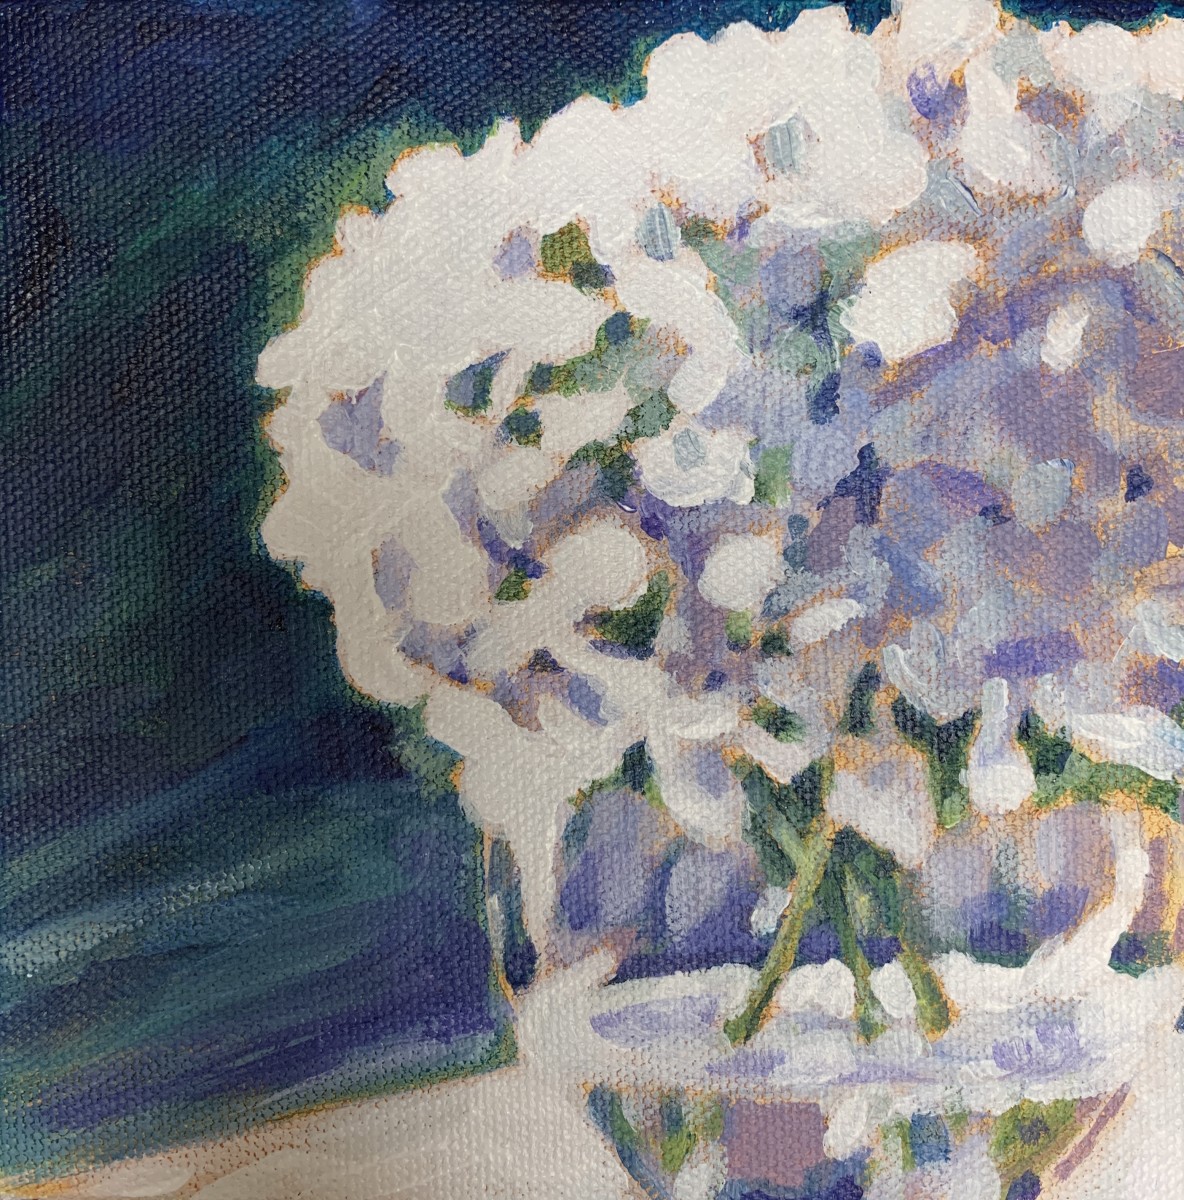 Hydrangea series: Lilac too by Marcia Hoeck 